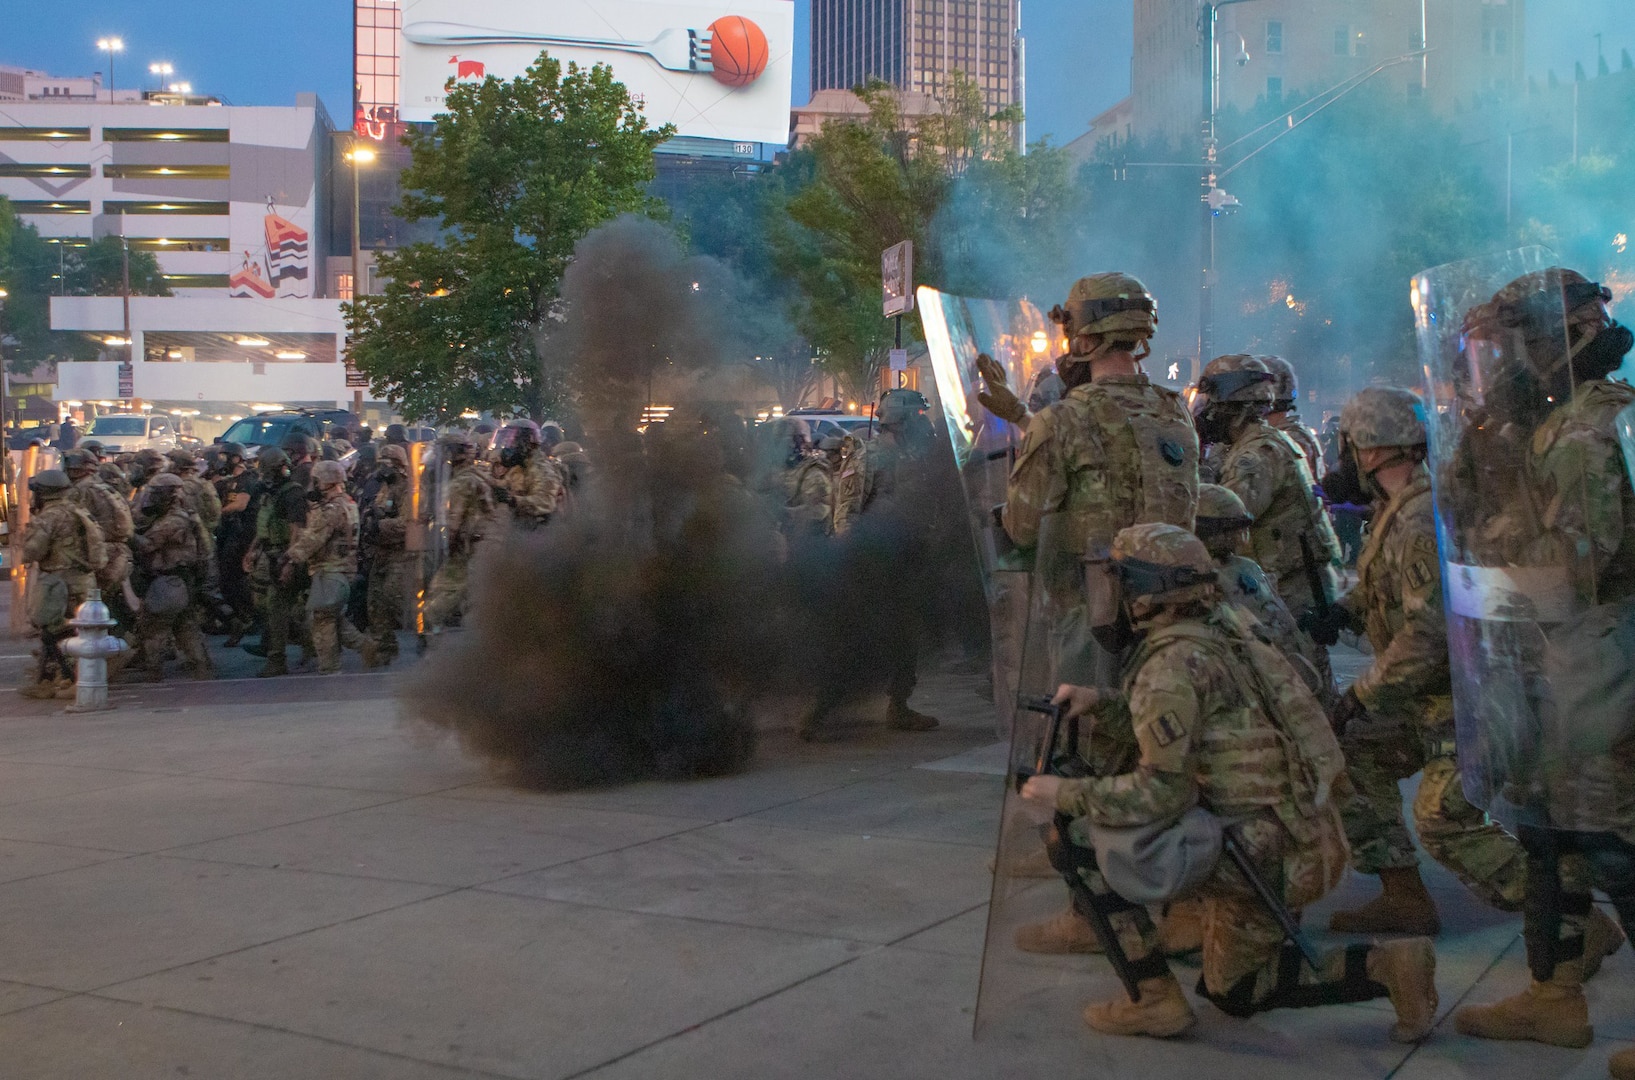 Georgia Army National Guard Soldiers shield themselves during demonstrations in Atlanta, June 2, 2020. Tear gas had to be employed by police that night to stop violence and clear the streets after the 9 p.m. curfew.